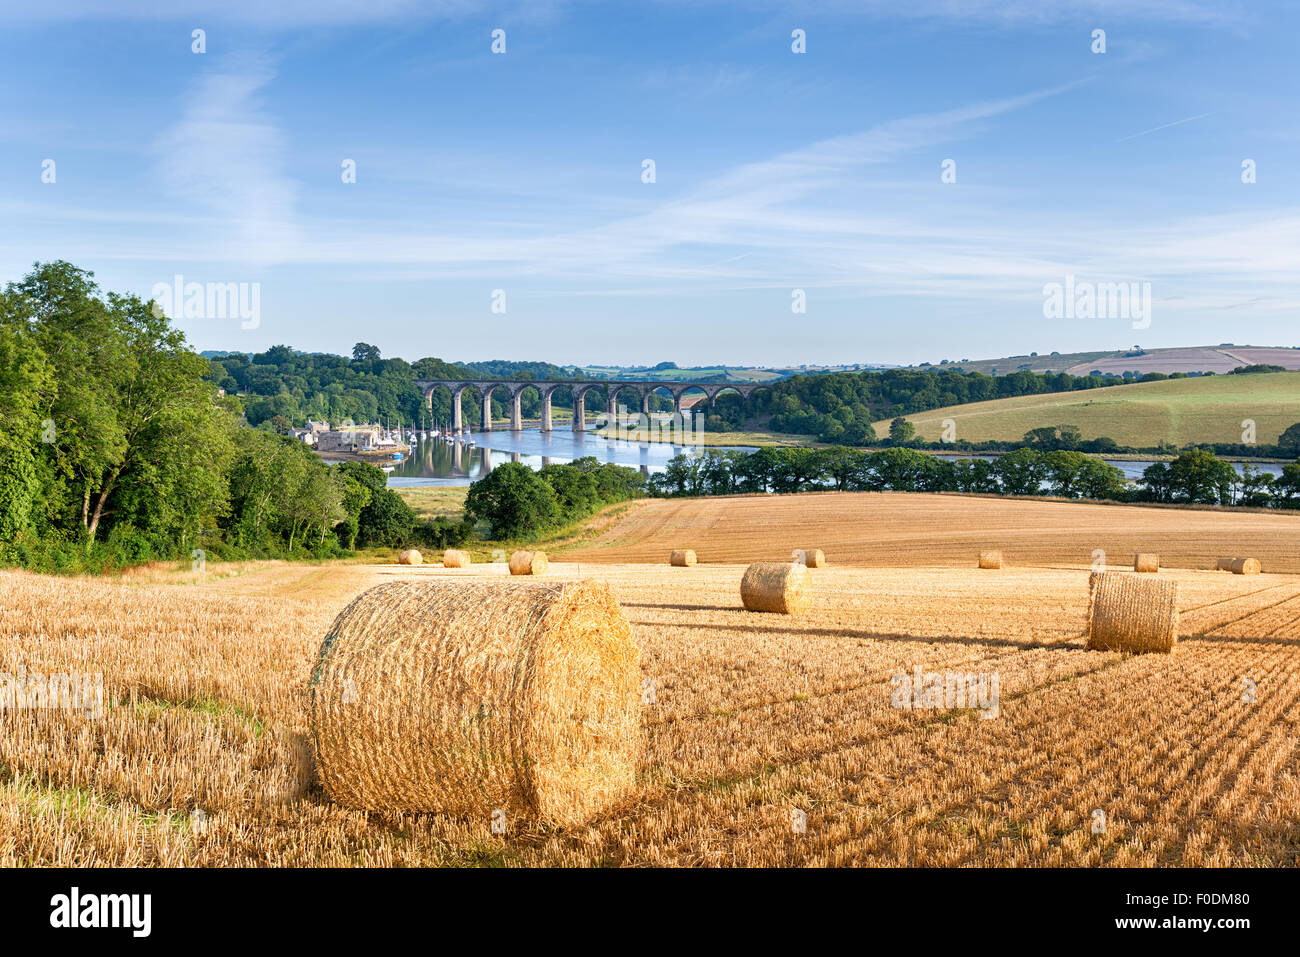 Hay bales at harvest time in the Cornsih countryside Stock Photo